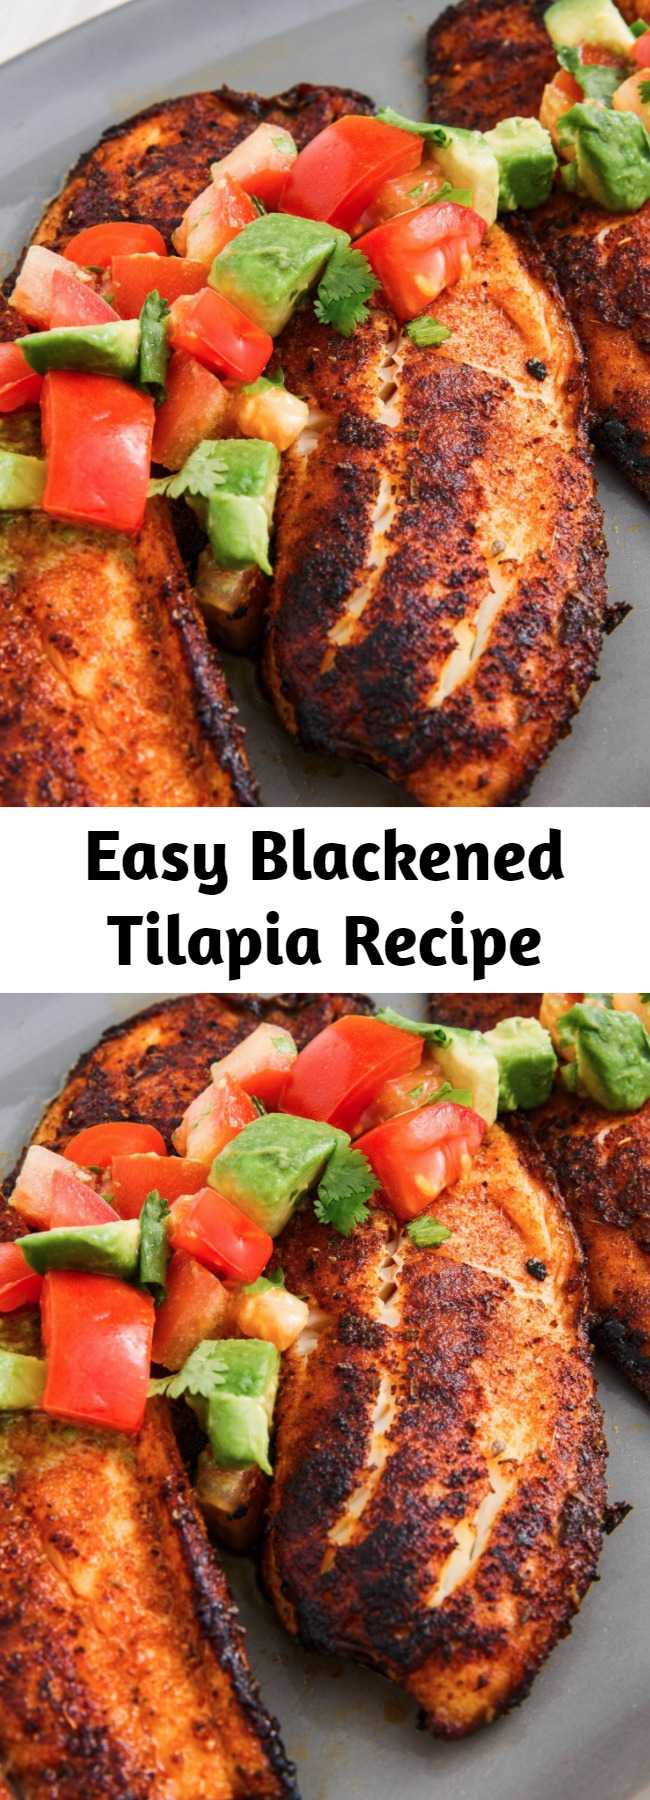 Easy Blackened Tilapia Recipe - Jazz up your fish routine with this super-easy recipe for Blackened Tilapia with Avocado Salsa.